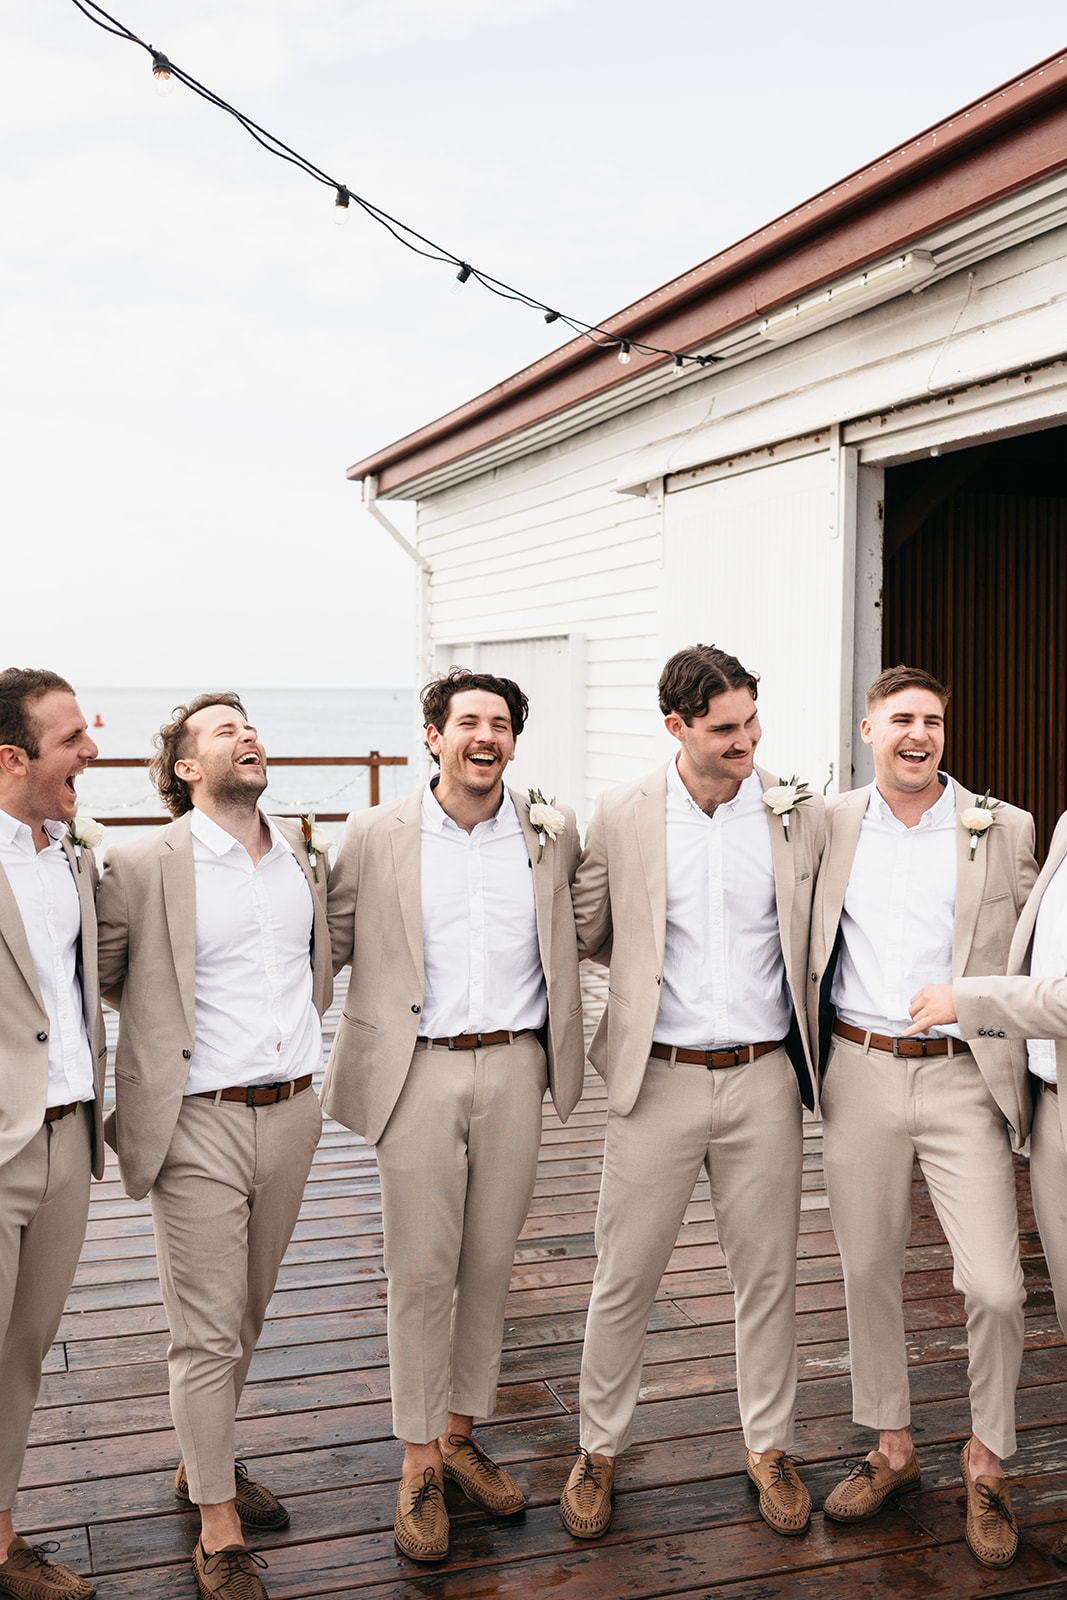 Groom and groomsmen in Port Douglas for wedding photos at the Sugar Wharf